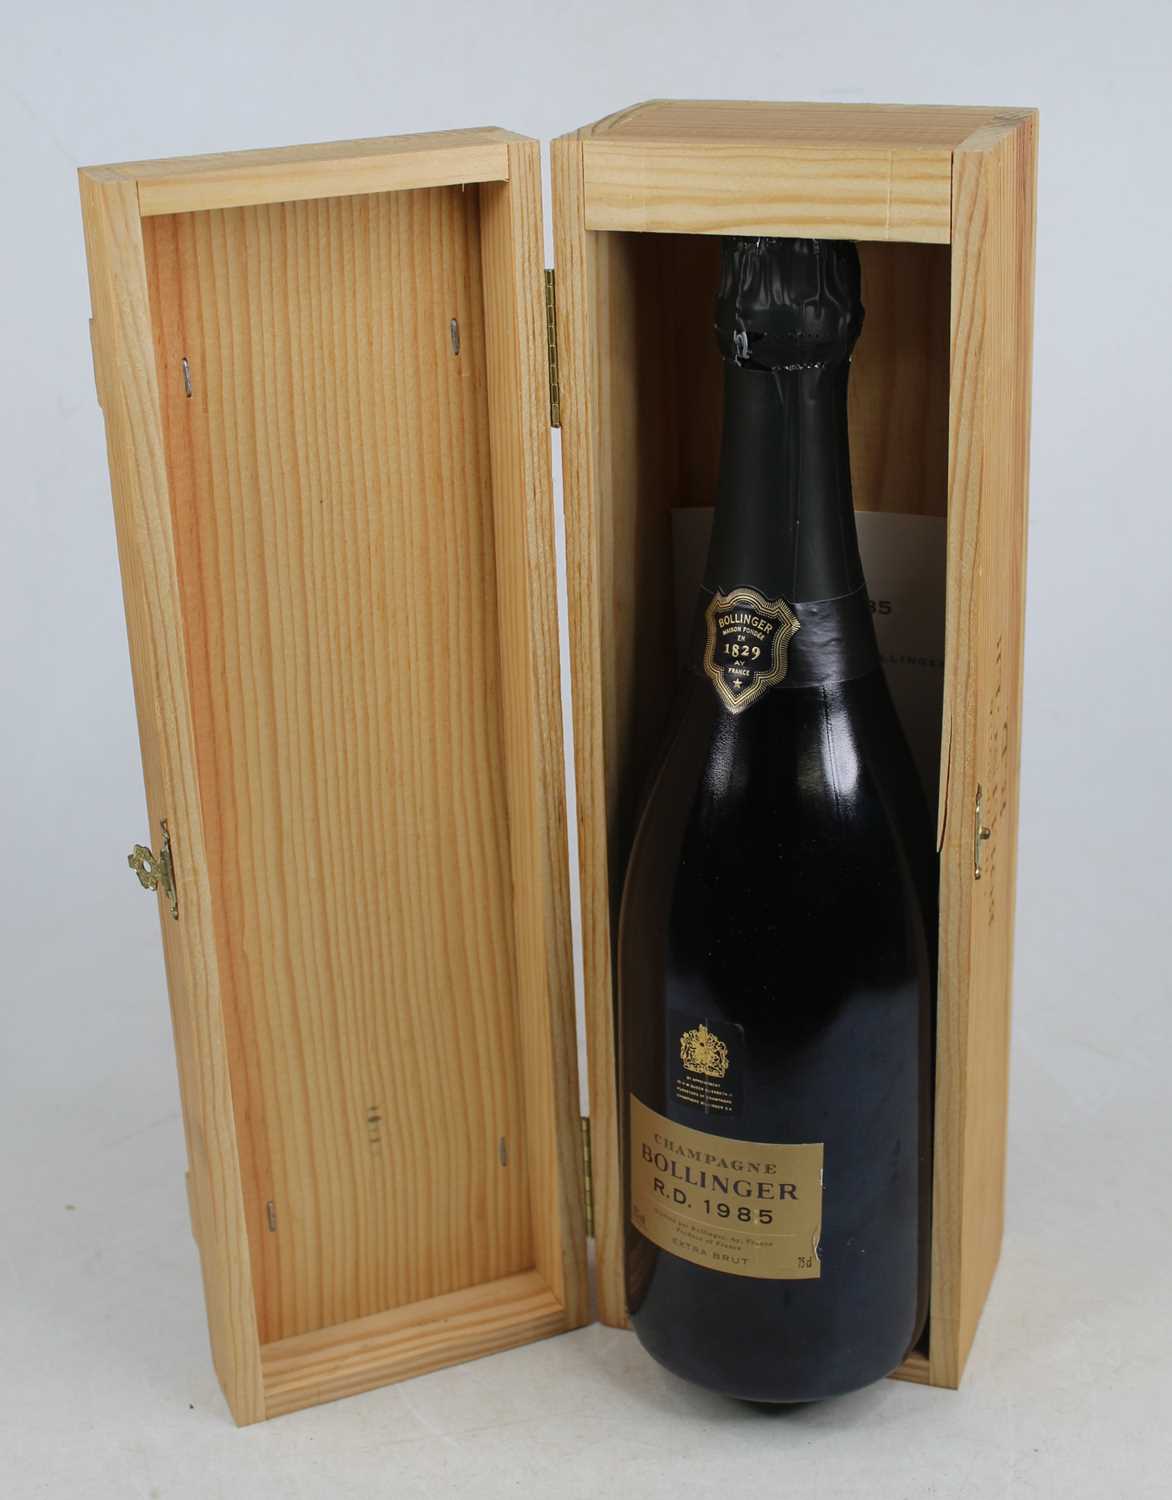 Lot 1209 - Bollinger R.D. extra brut champagne 1985, one...